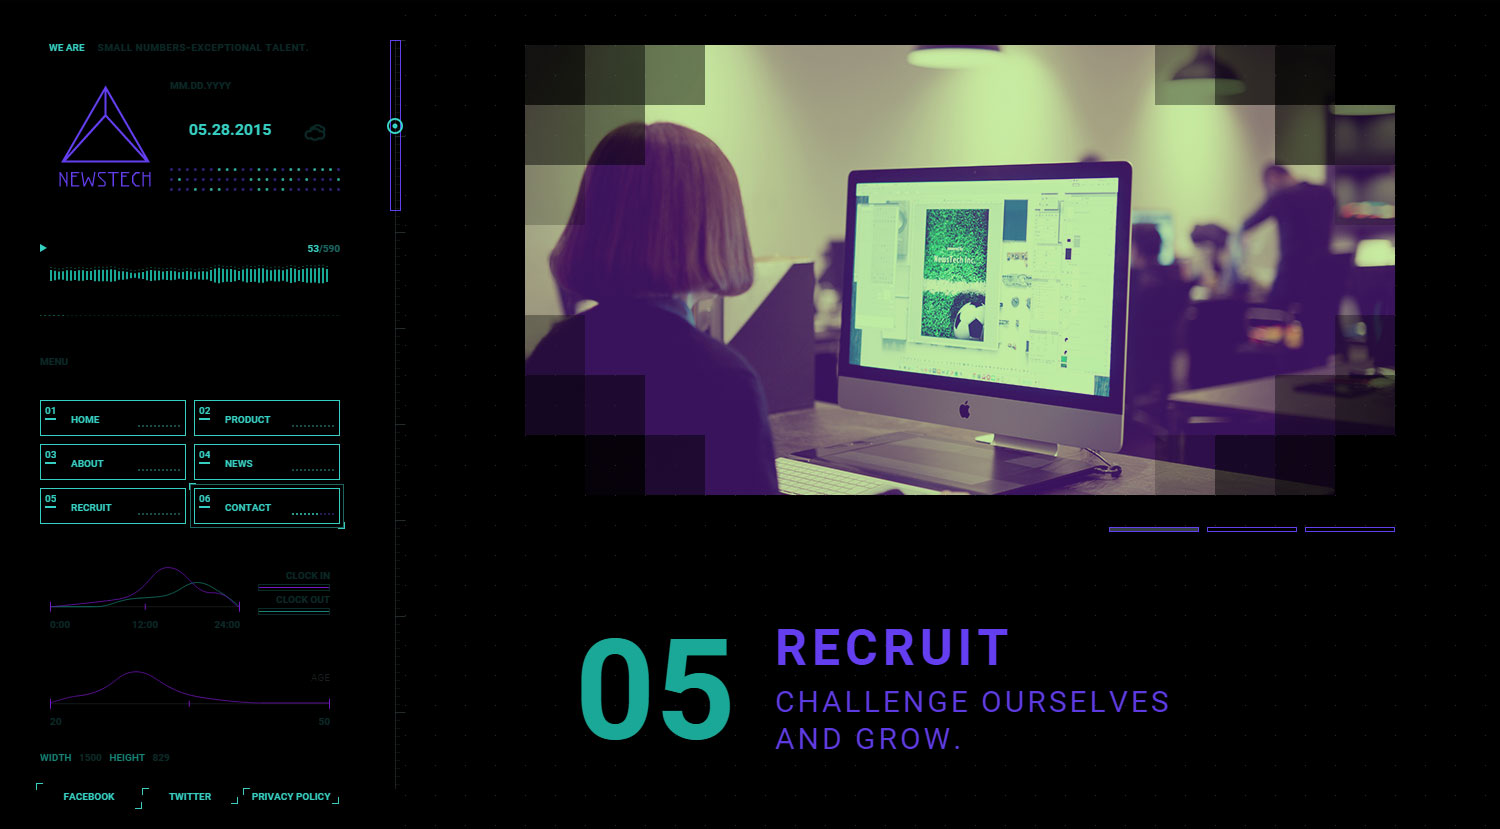 NewsTech Inc. - Website of the Day